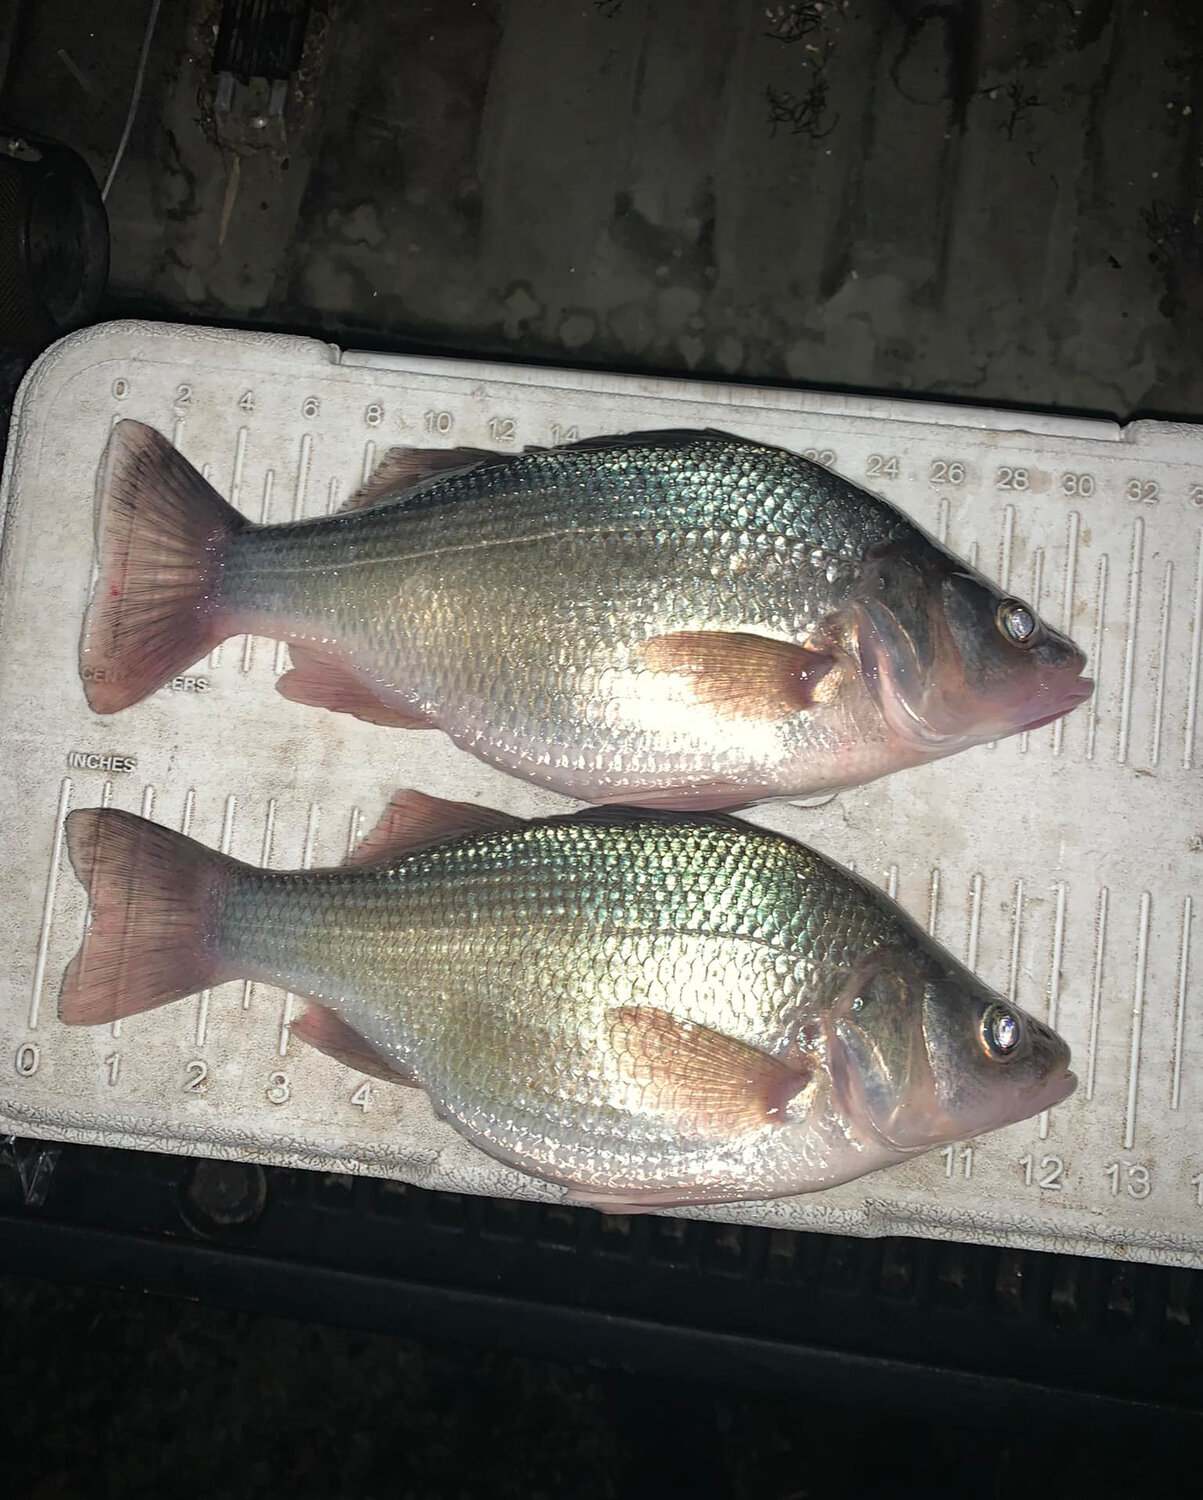 What You Need To Catch White Perch With Bloodworms In Winter